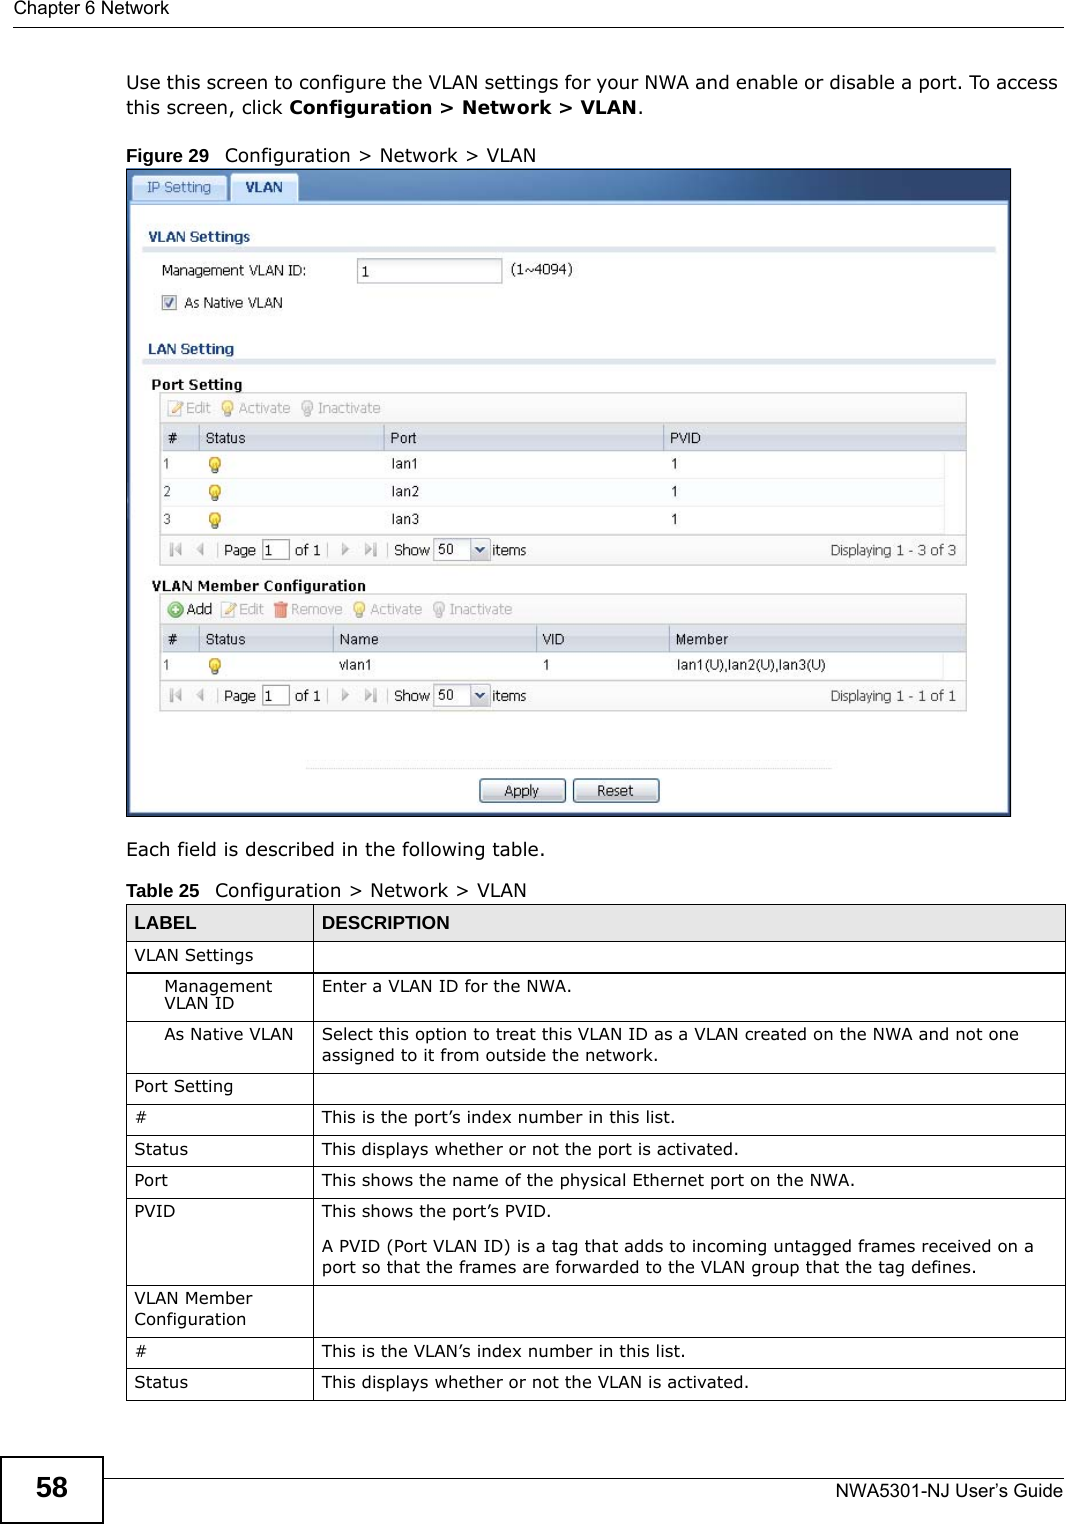 Chapter 6 NetworkNWA5301-NJ User’s Guide58Use this screen to configure the VLAN settings for your NWA and enable or disable a port. To access this screen, click Configuration &gt; Network &gt; VLAN.Figure 29   Configuration &gt; Network &gt; VLAN      Each field is described in the following table.  Table 25   Configuration &gt; Network &gt; VLANLABEL  DESCRIPTIONVLAN SettingsManagement VLAN ID Enter a VLAN ID for the NWA.As Native VLAN Select this option to treat this VLAN ID as a VLAN created on the NWA and not one assigned to it from outside the network.Port Setting# This is the port’s index number in this list.Status This displays whether or not the port is activated.Port This shows the name of the physical Ethernet port on the NWA.PVID This shows the port’s PVID.A PVID (Port VLAN ID) is a tag that adds to incoming untagged frames received on a port so that the frames are forwarded to the VLAN group that the tag defines.VLAN Member Configuration# This is the VLAN’s index number in this list.Status This displays whether or not the VLAN is activated.